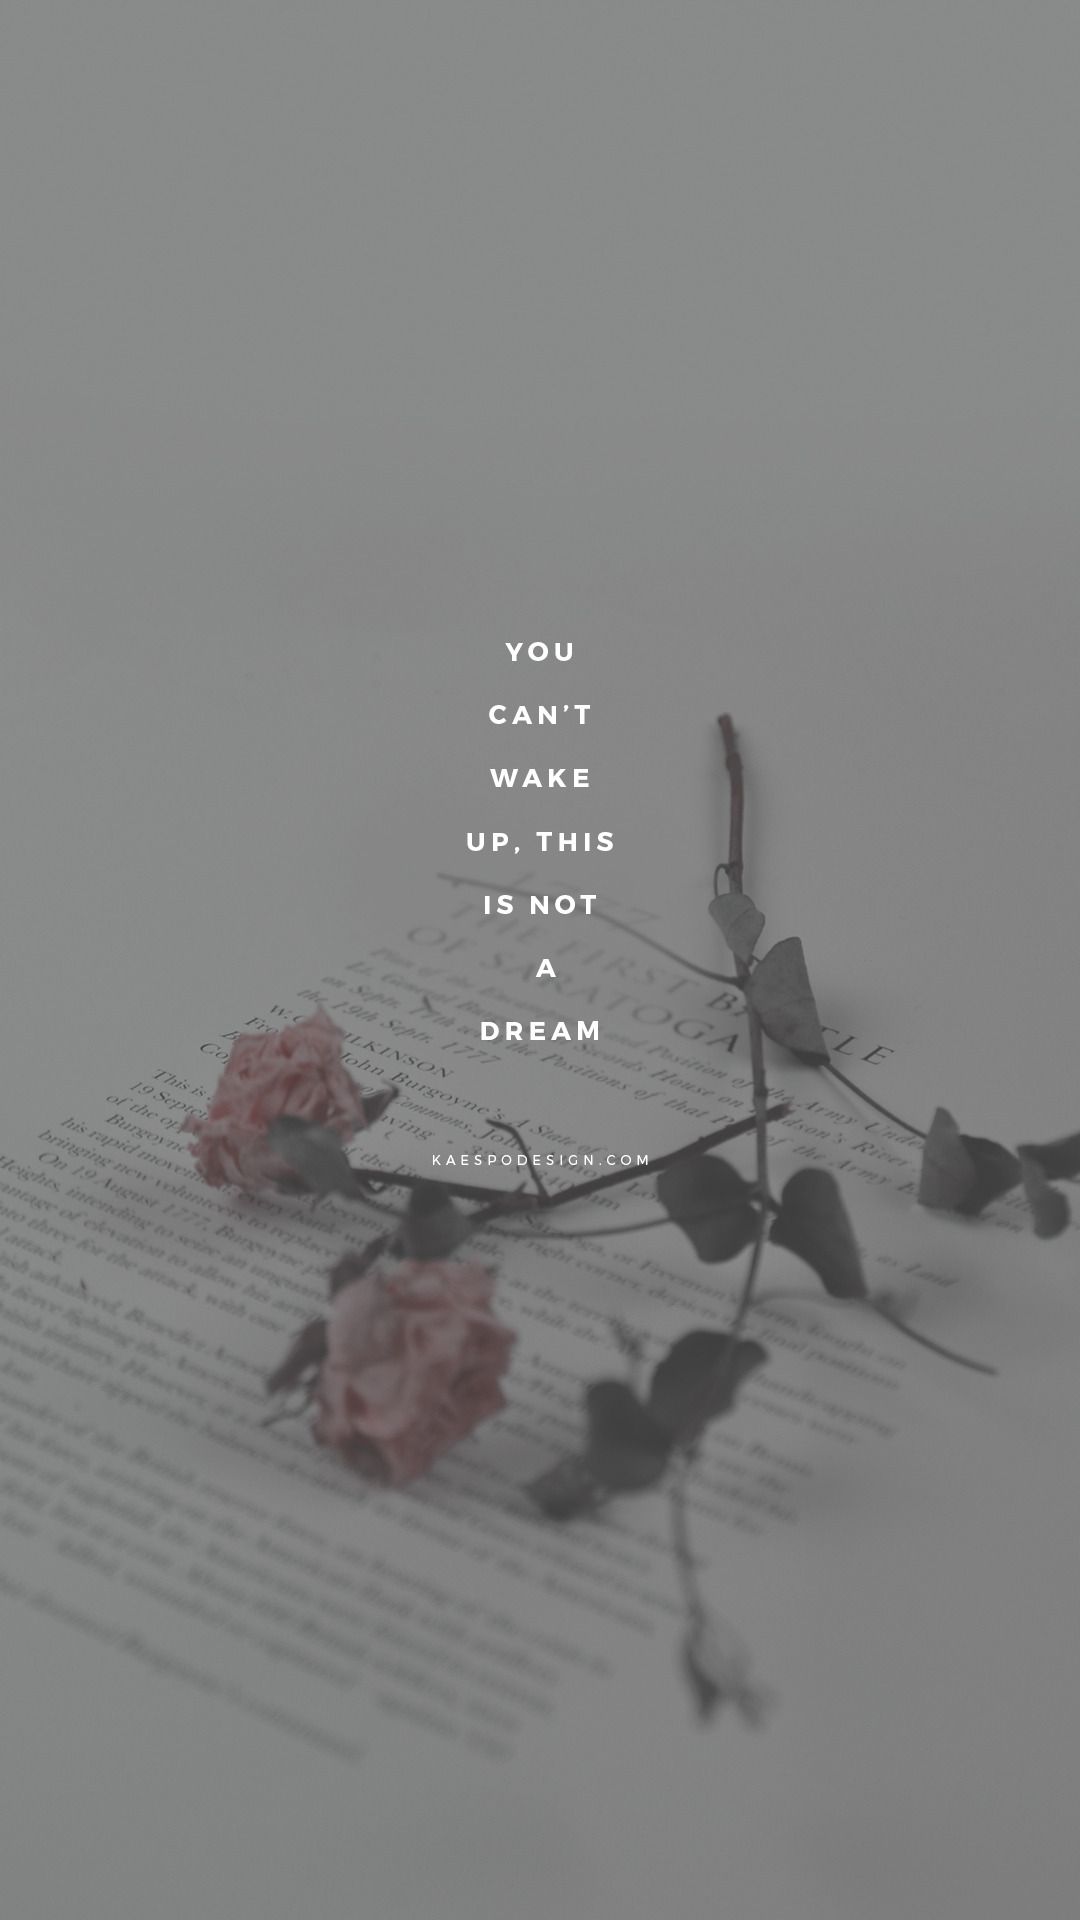 You can't wake up. This is not a dream. Aesthetic wallpaper for phone and desktop. - Shawn Mendes